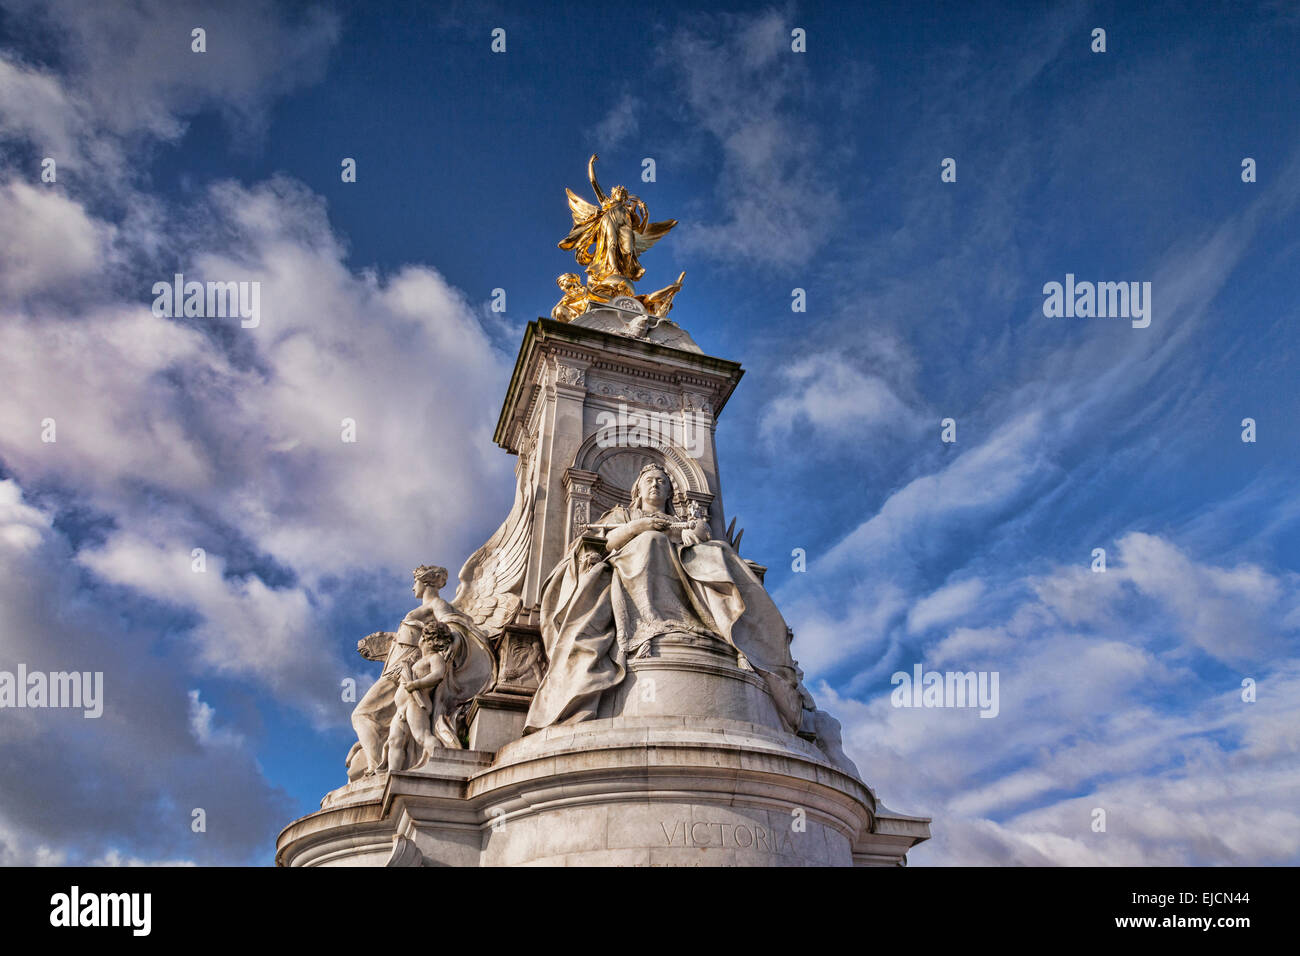 Victoria Memorial, le Mall, Londres, Angleterre. Banque D'Images